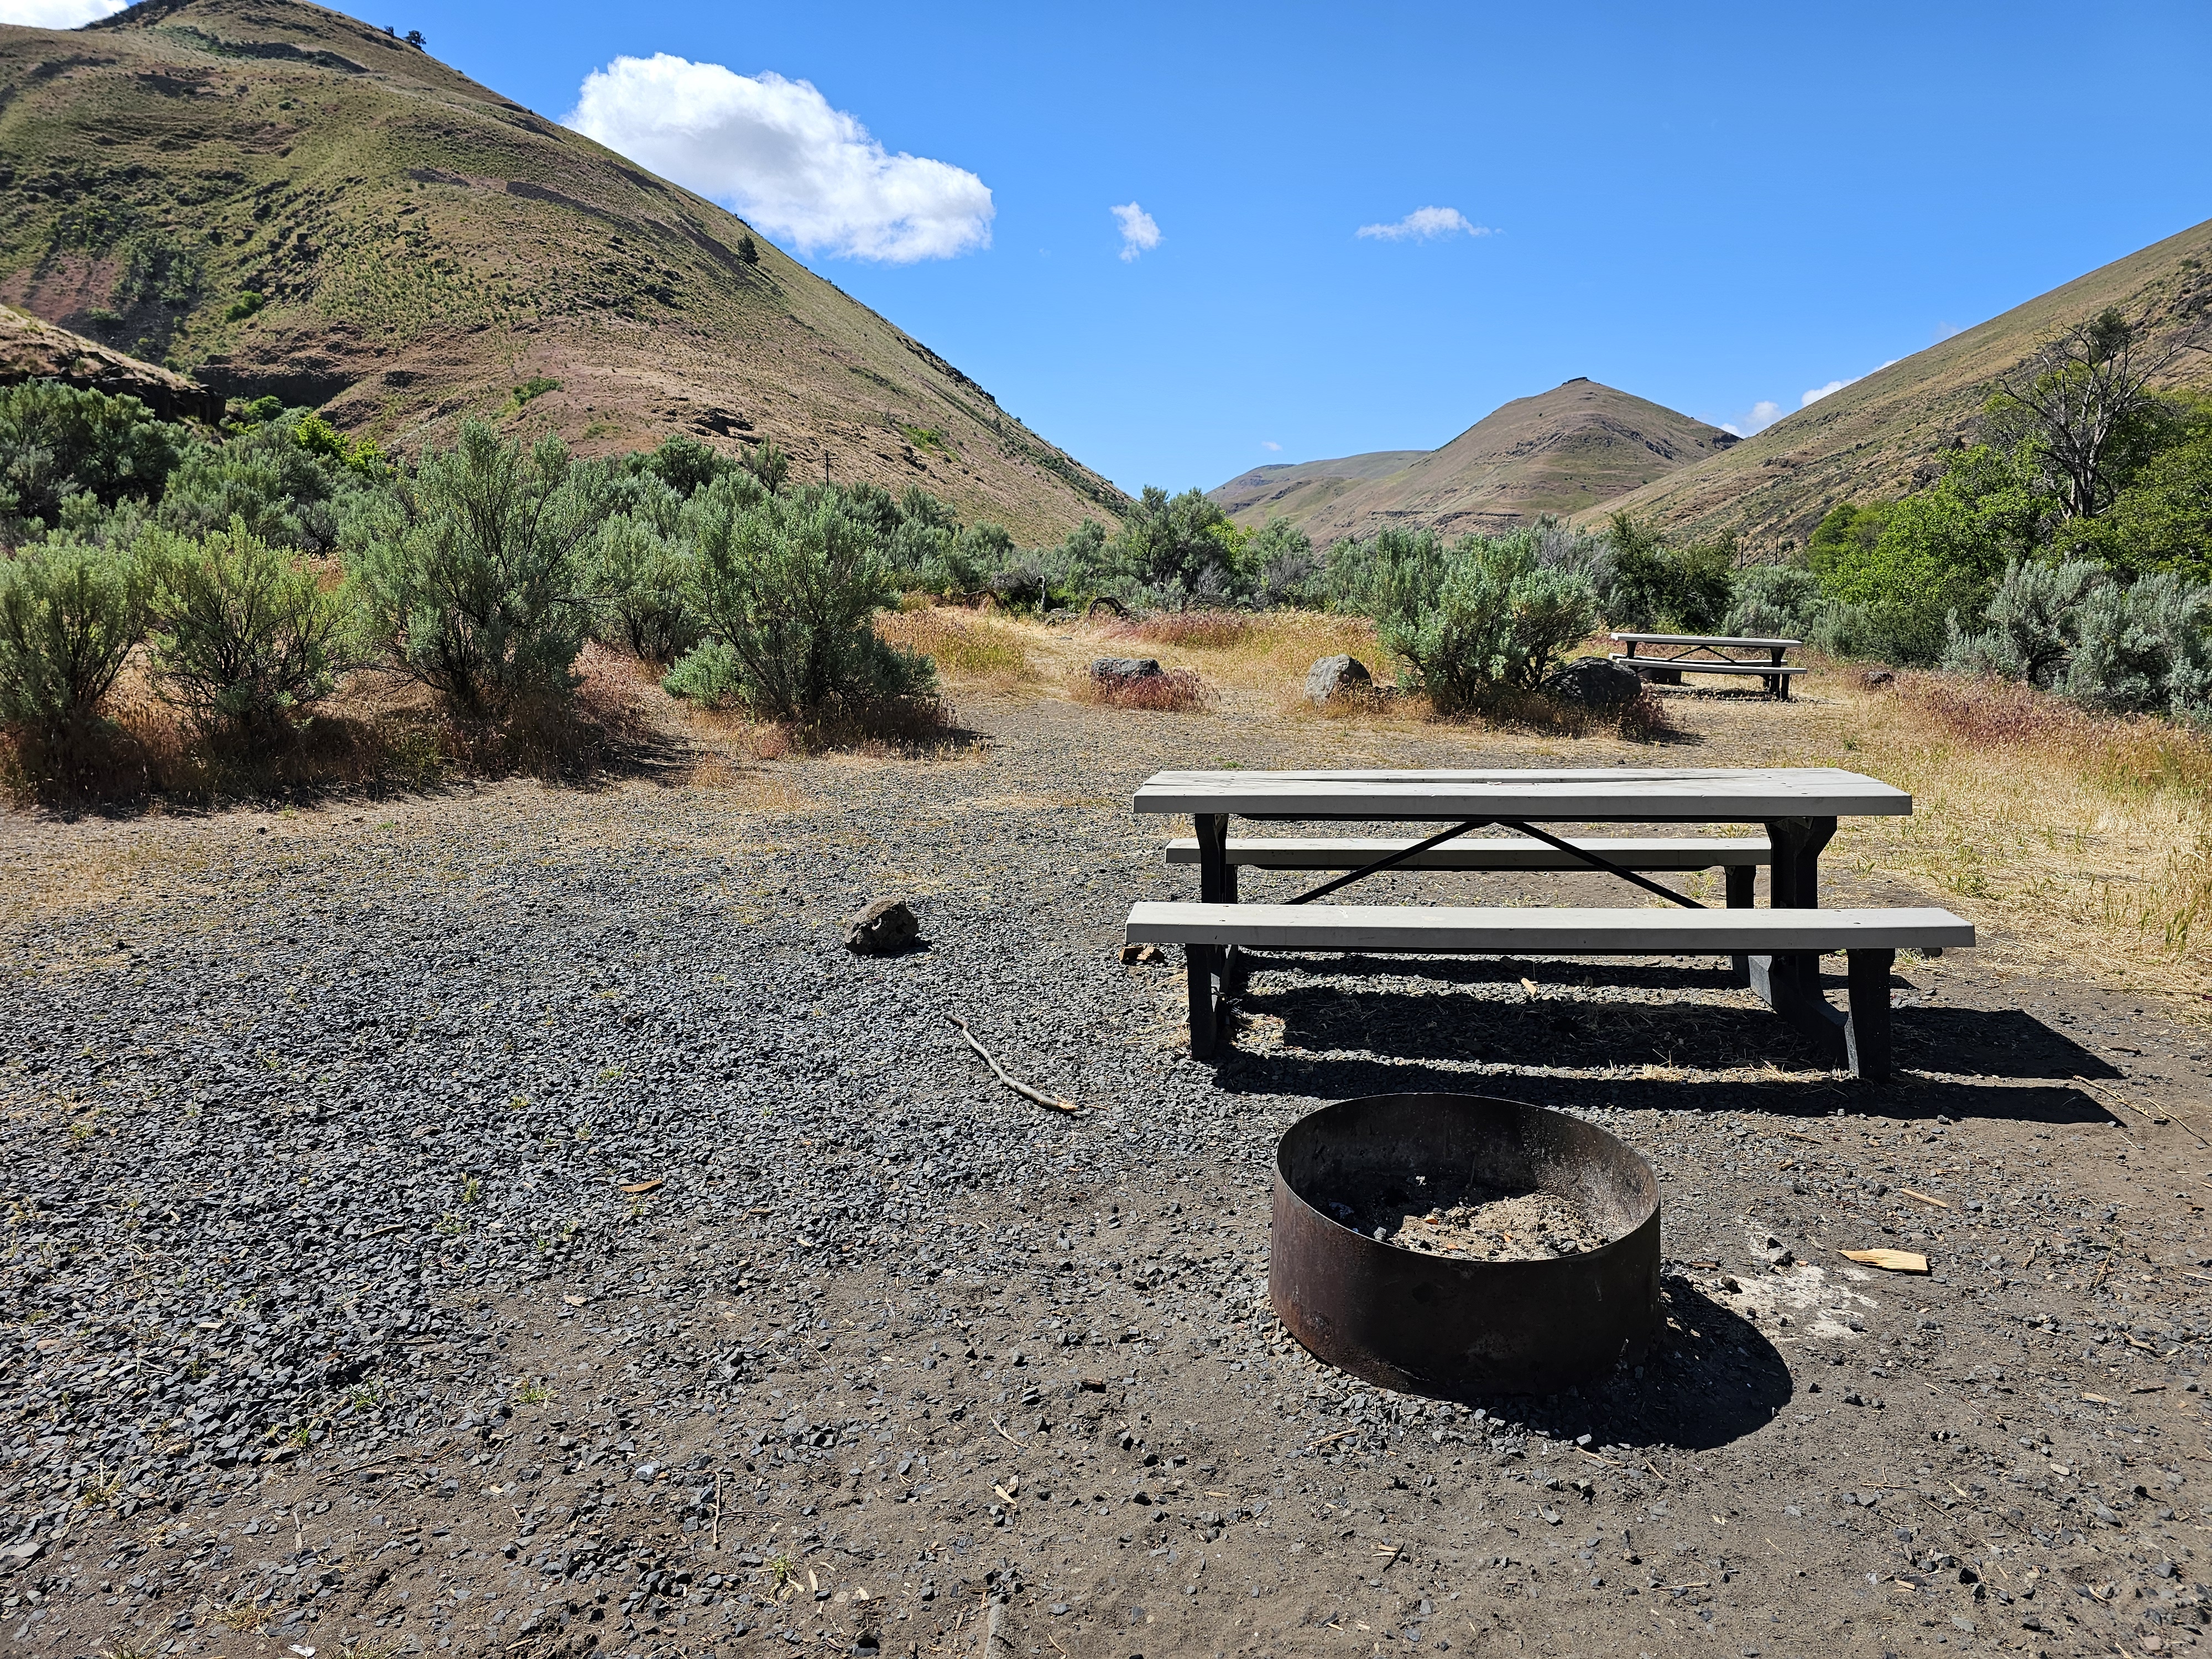 Walk-in campsites 1 & 2 at Devil's Canyon Campground